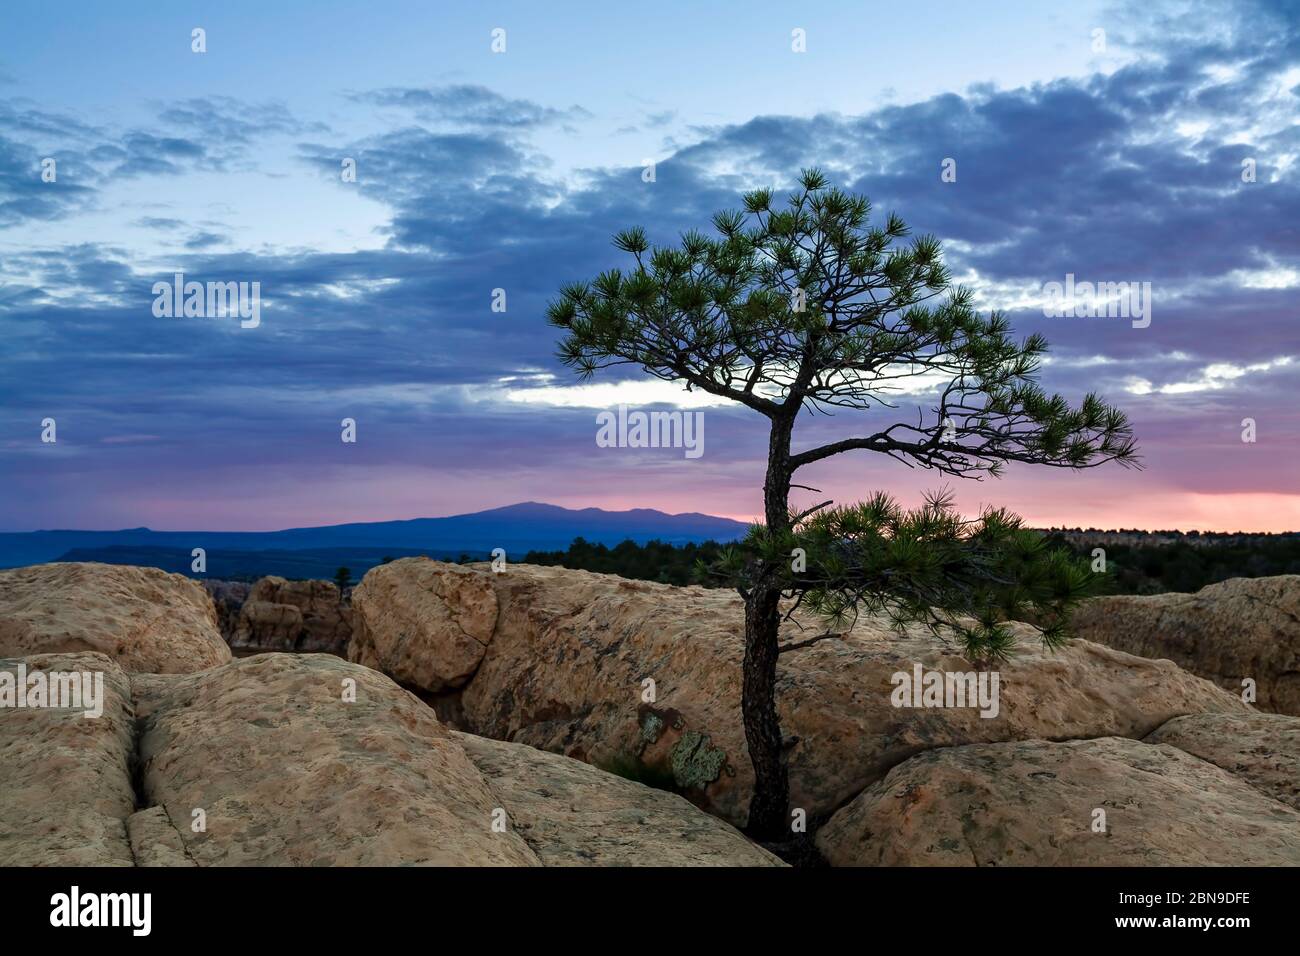 Tree on sandstone at sunrise from Sandstone Bluffs Overlook (Mt.Taylor, 11,301 ft., in background), El Malpais National Monument, New Mexico USA Stock Photo